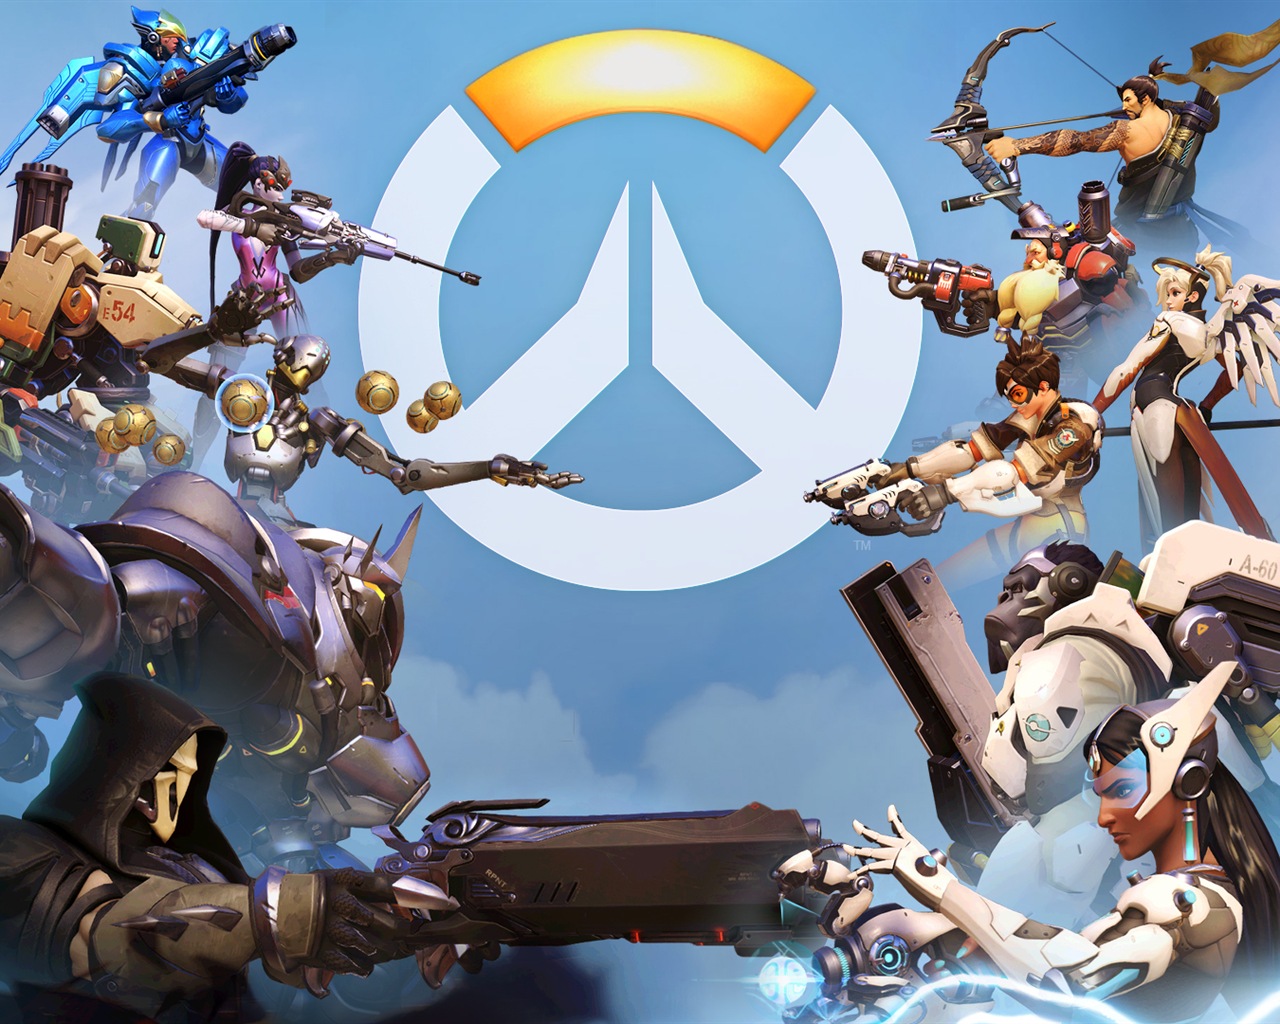 Overwatch, hot game HD wallpapers #13 - 1280x1024